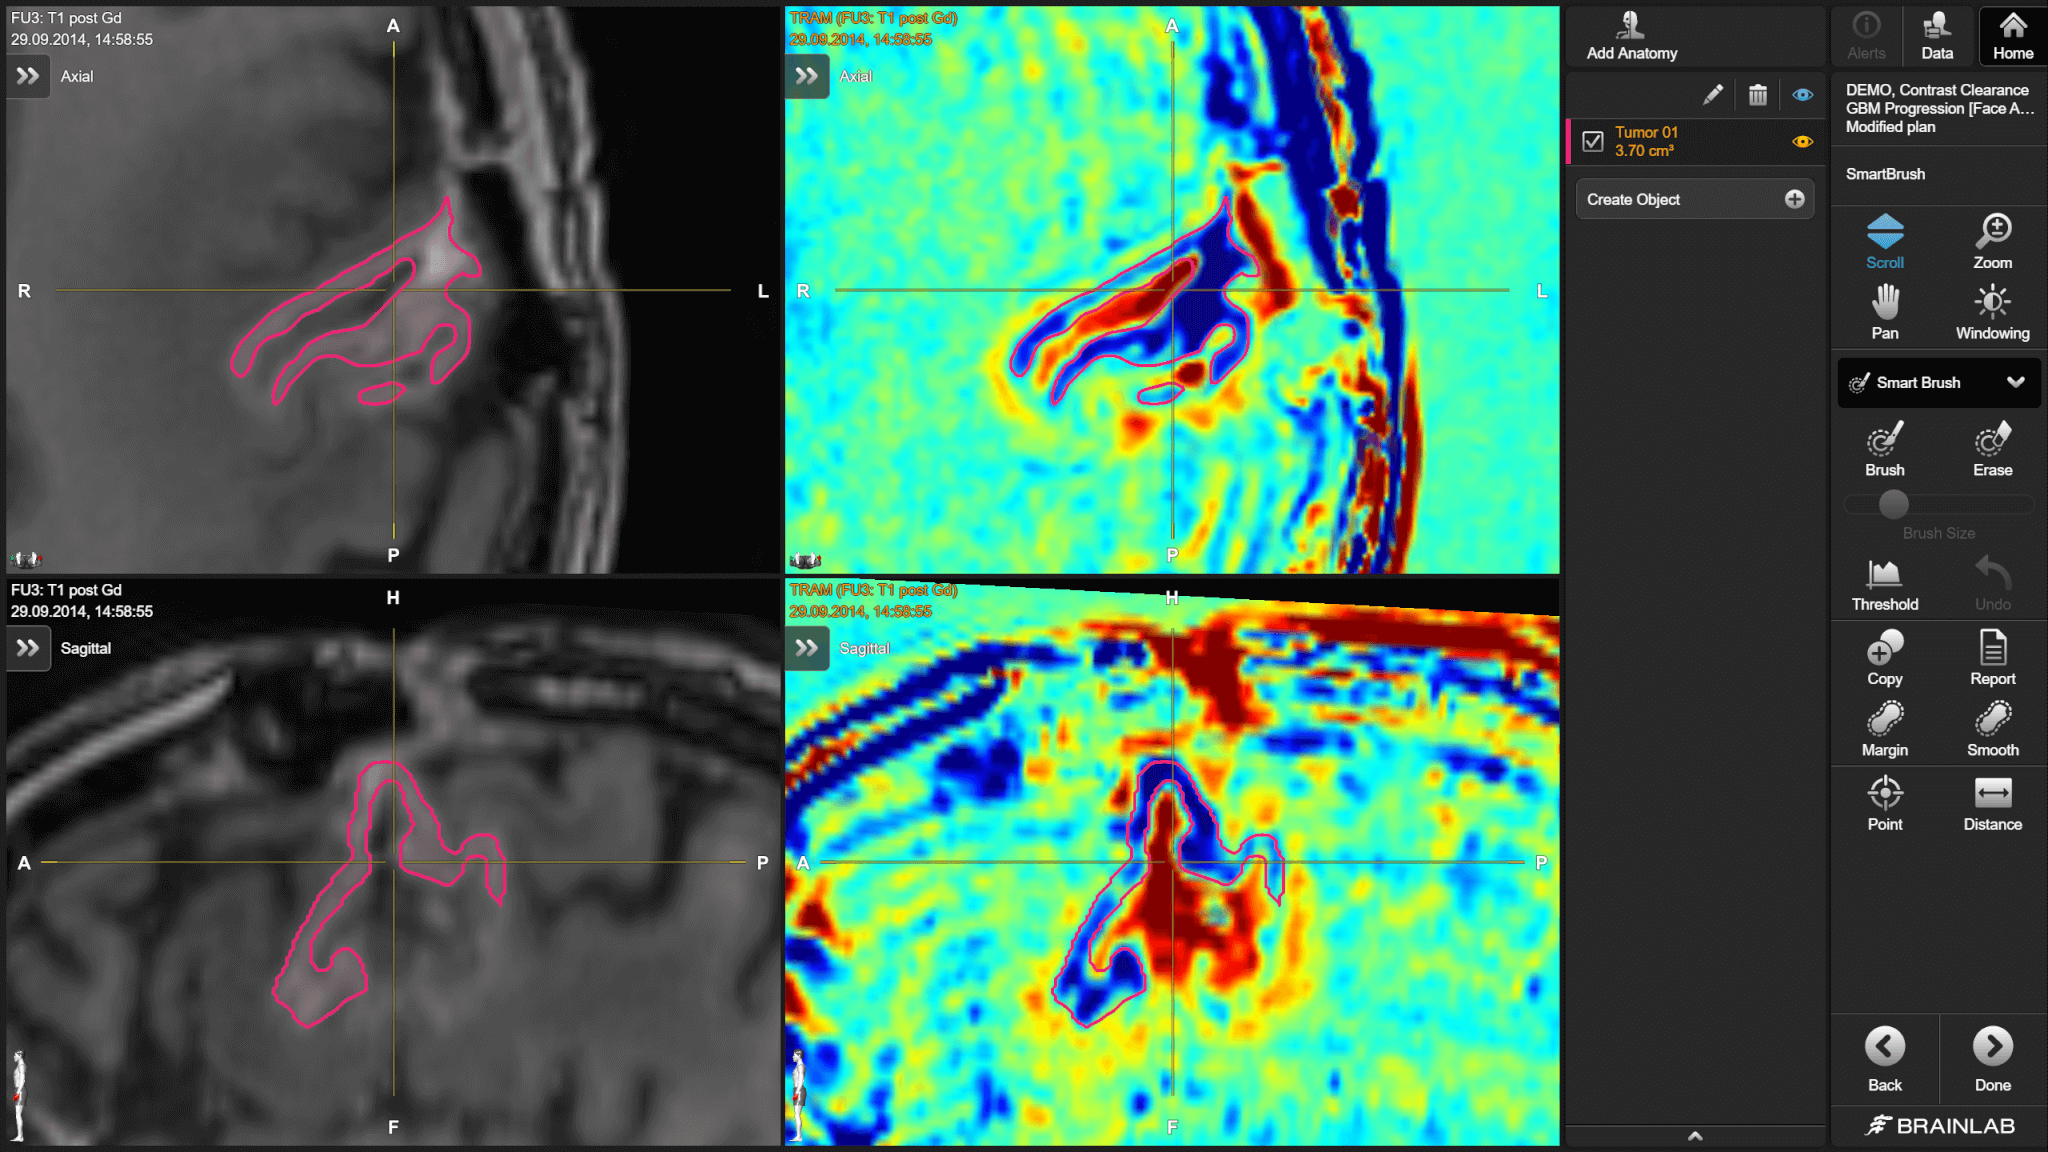 Side-by-side MRI images of a brain, the left in black and white and the right in color showing the differences in contrast agent clearance by the tissue in the brain.